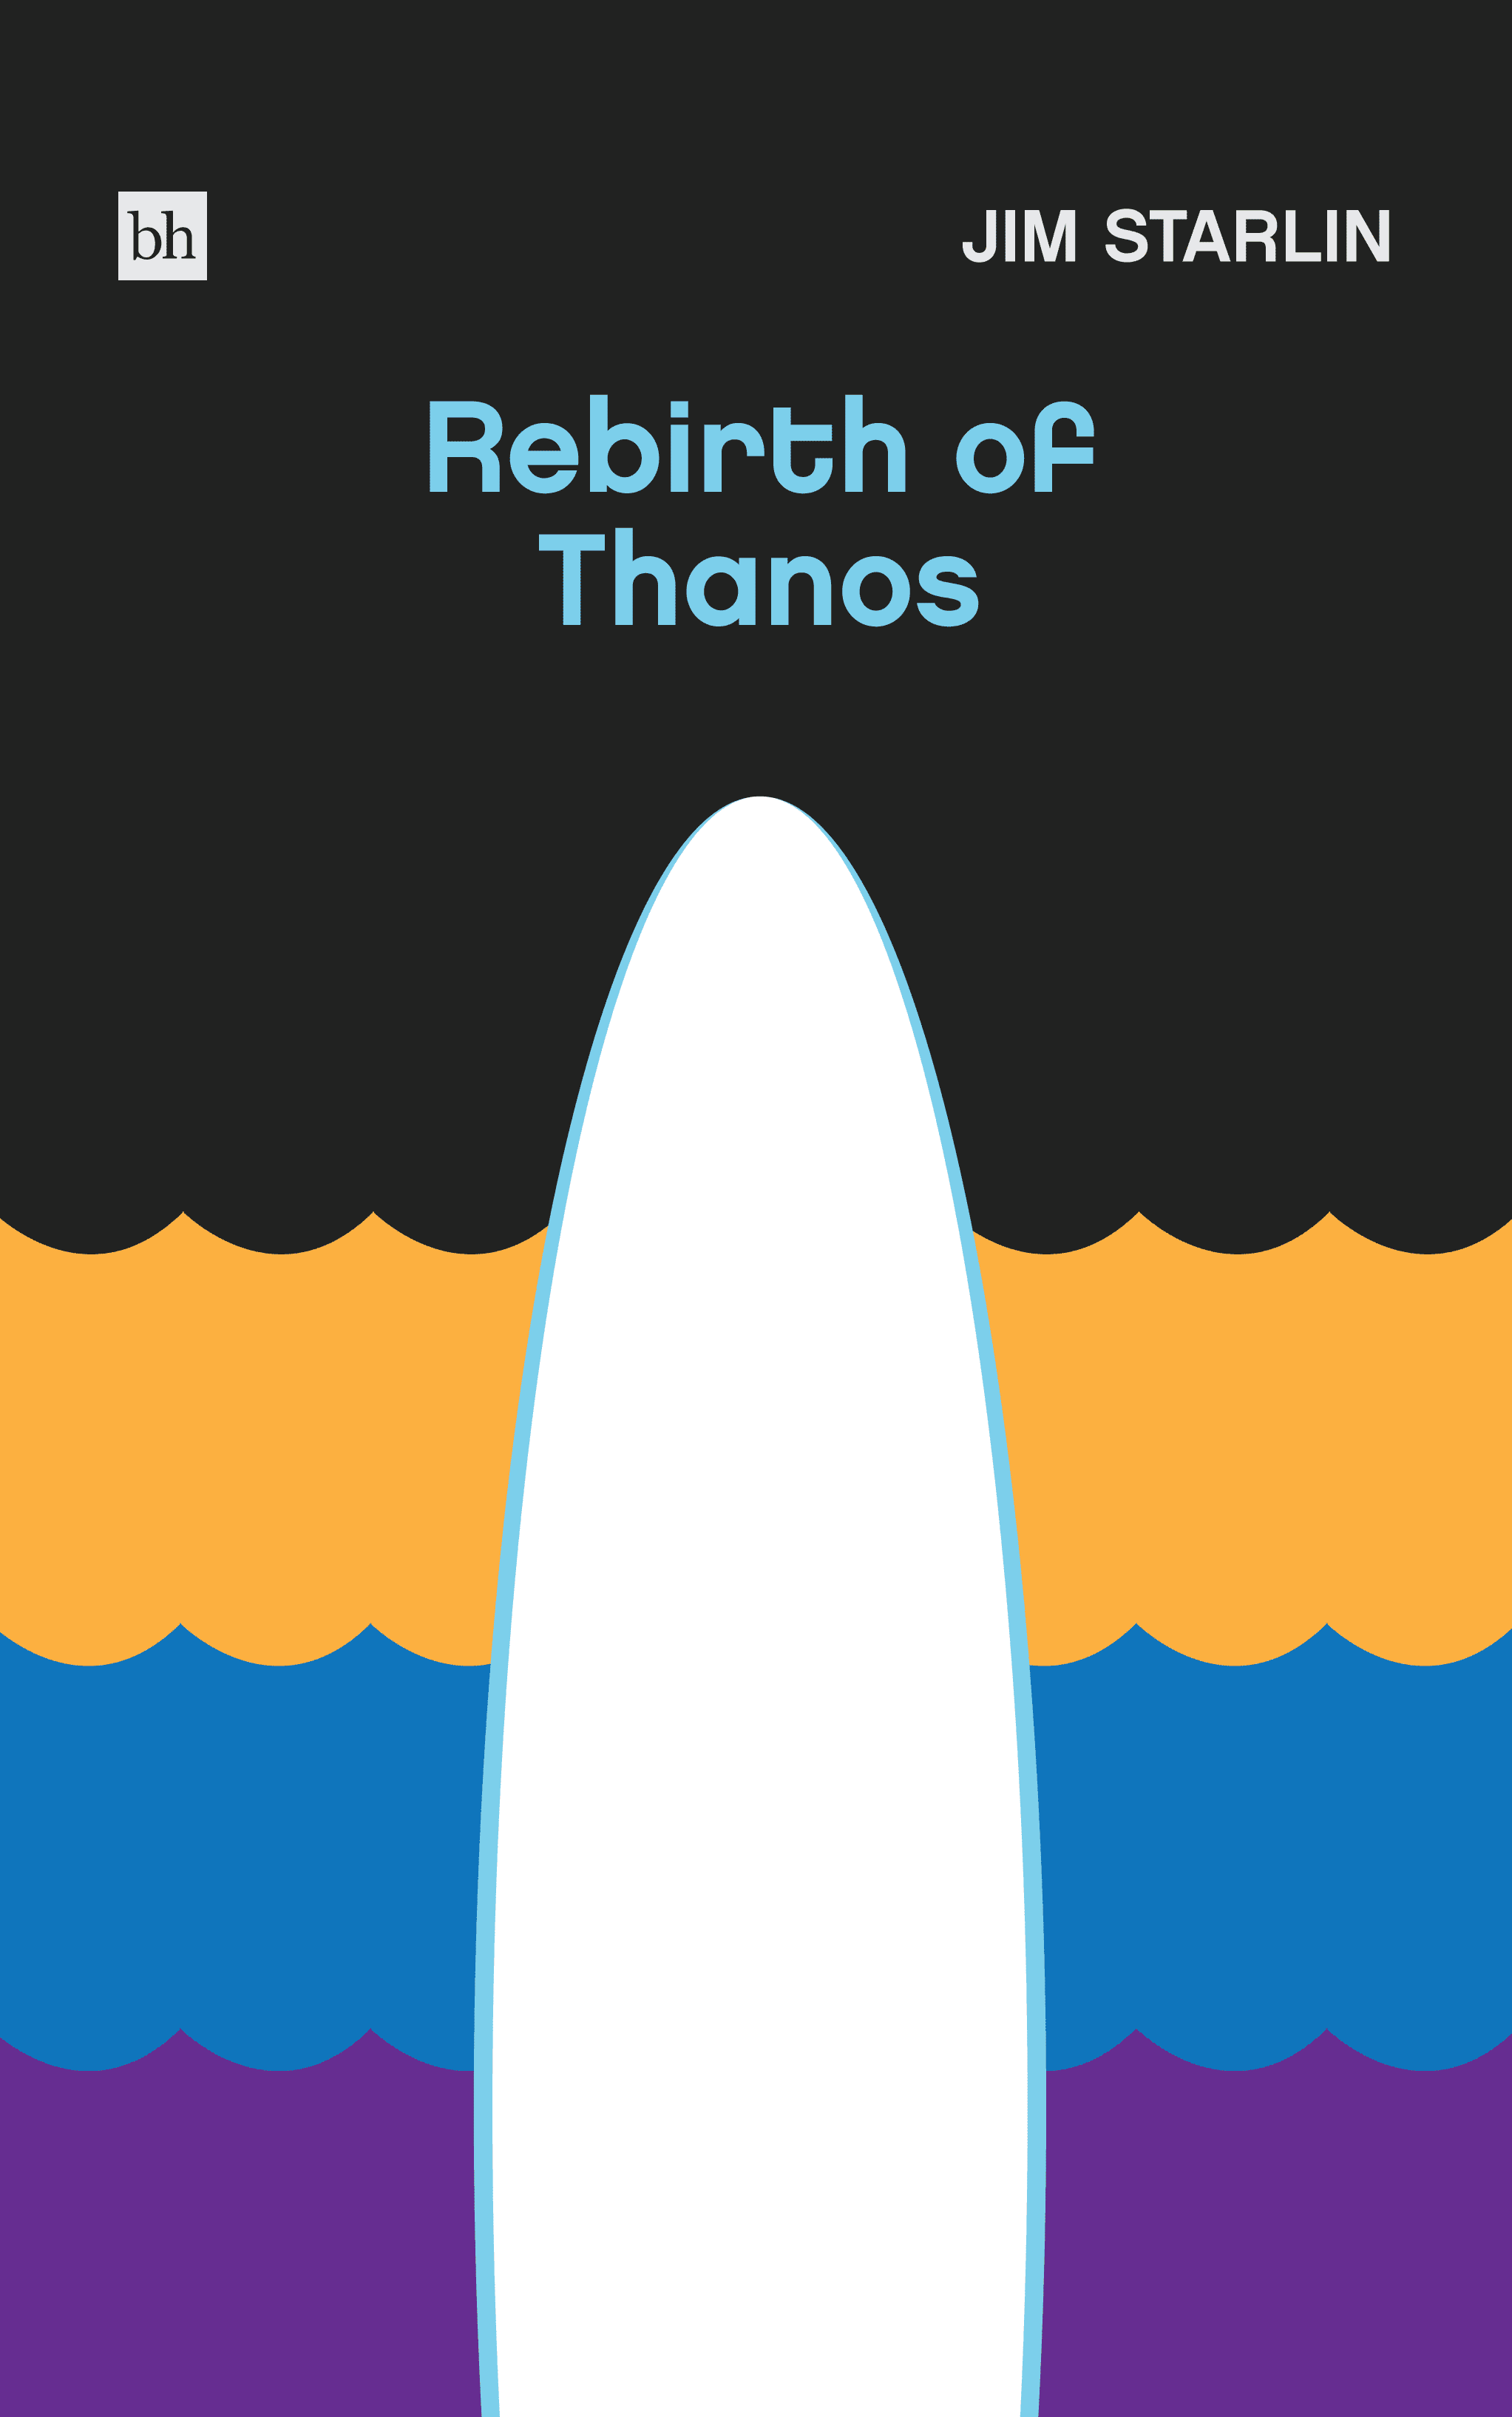 Book cover mock thumbnail for The Silver Surfer: Rebirth of Thanos